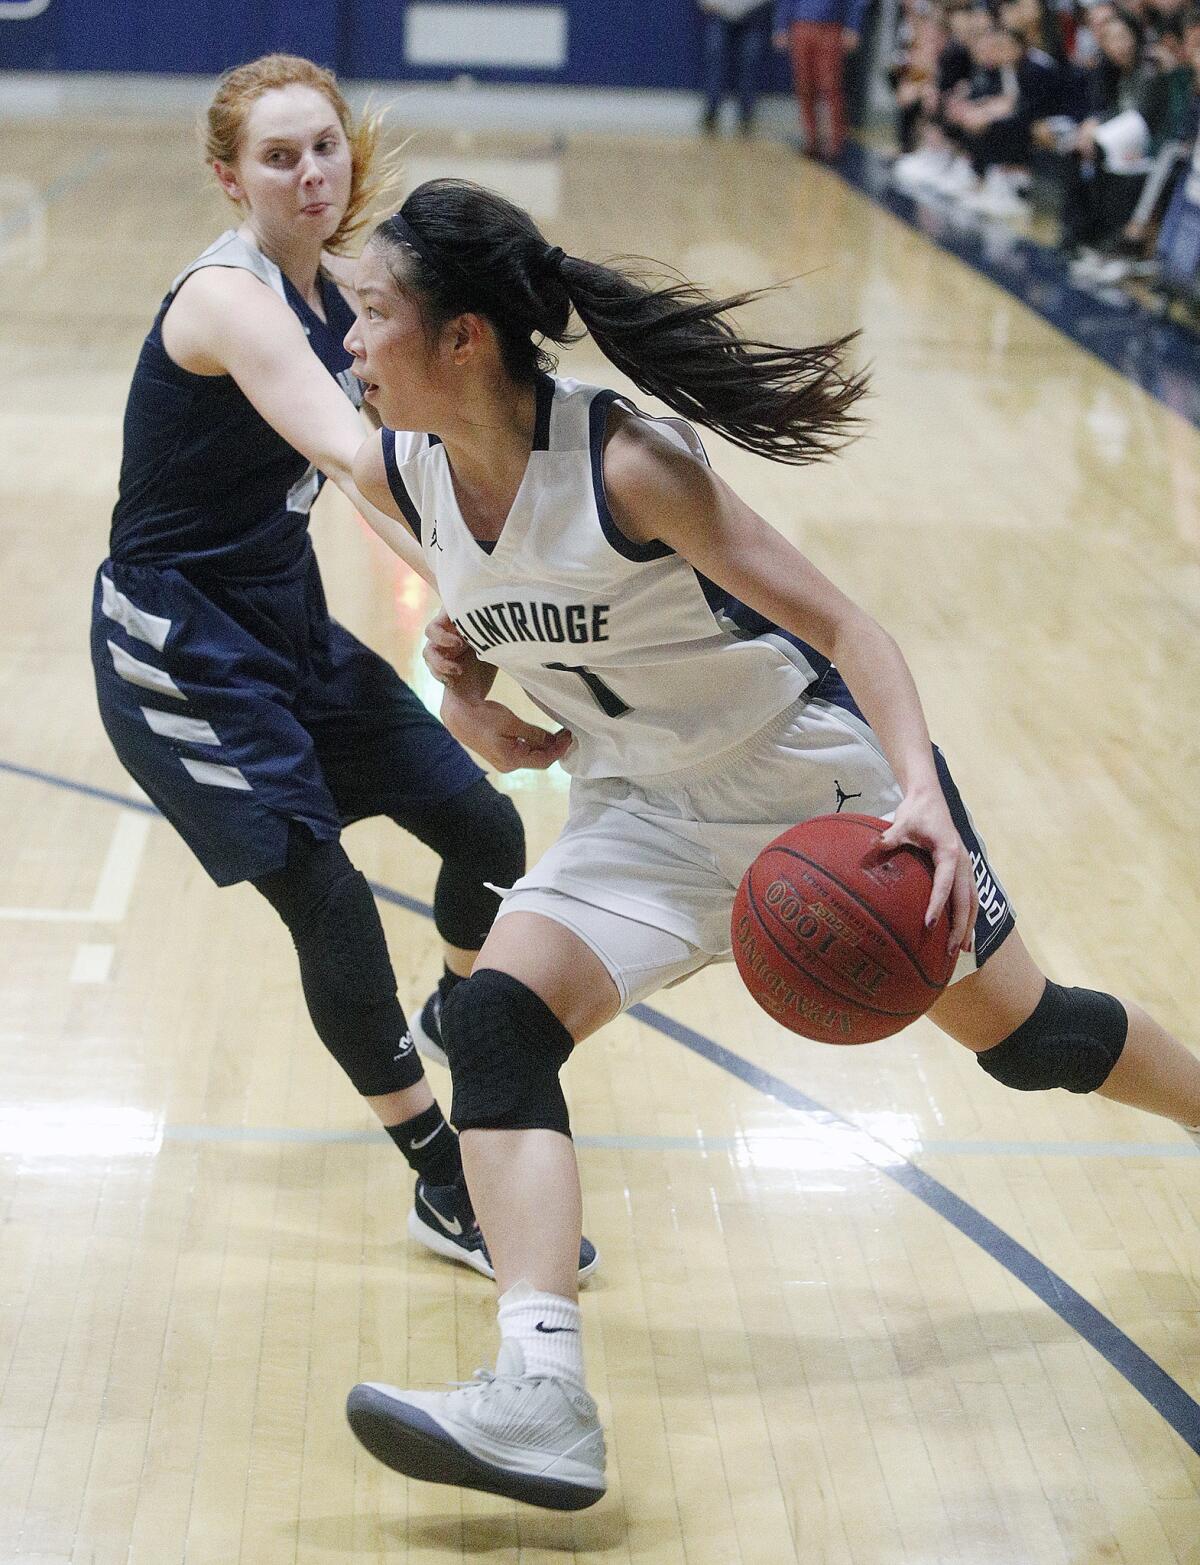 Flintridge Prep's Kaitlyn Chen averaged 18.9 points per game this season en route to being named the Prep League's Most Valuable Player for the third season in a row.